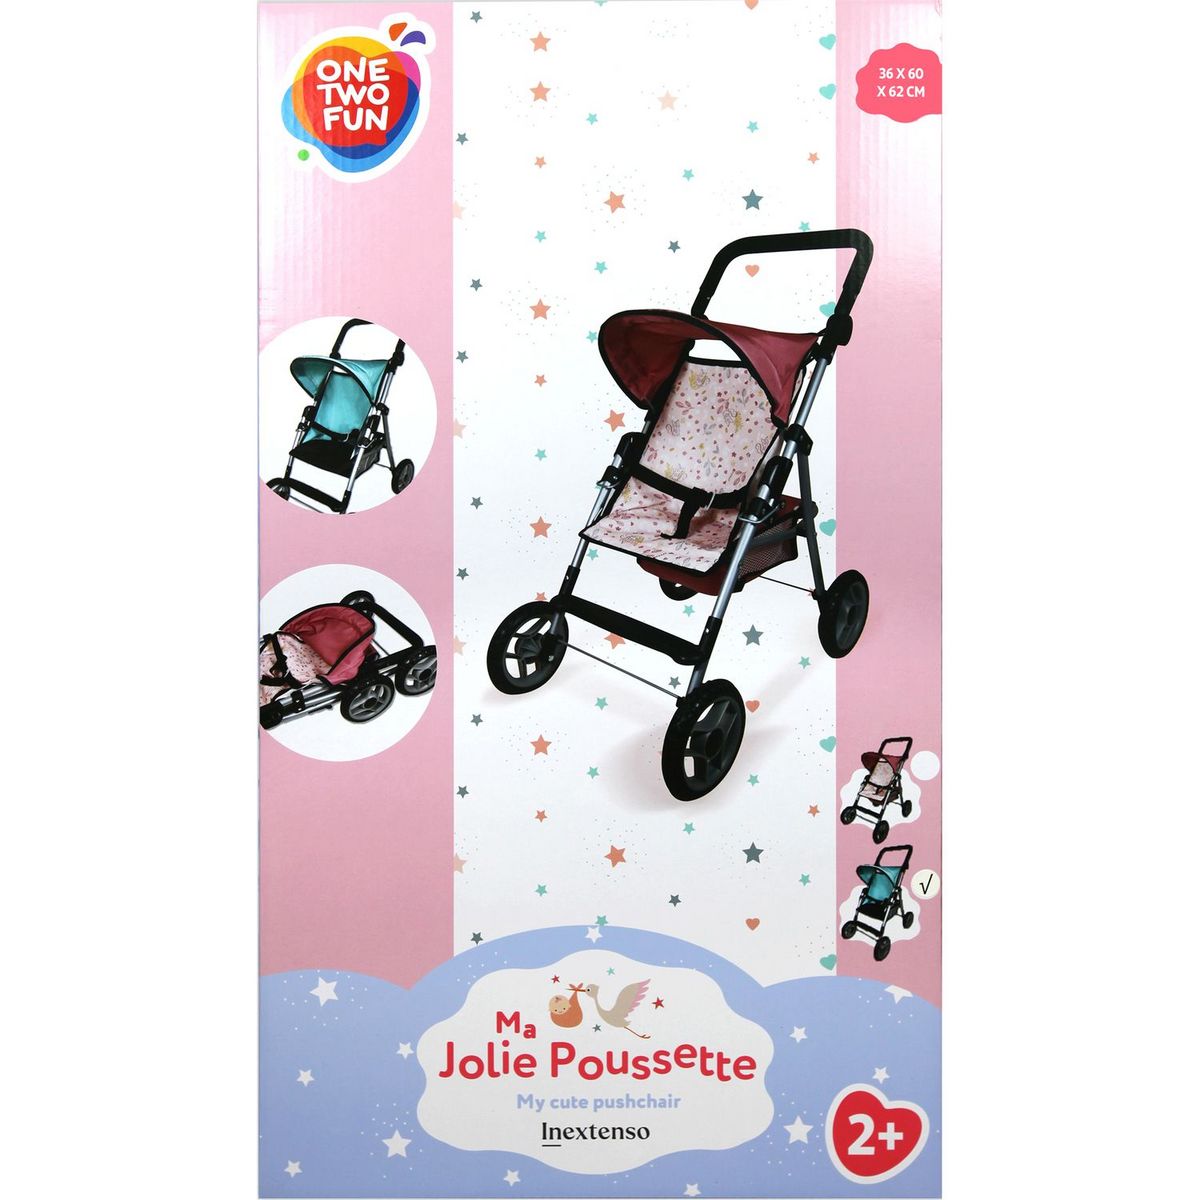 ONE TWO FUN Ma jolie poussette In Extenso pas cher 